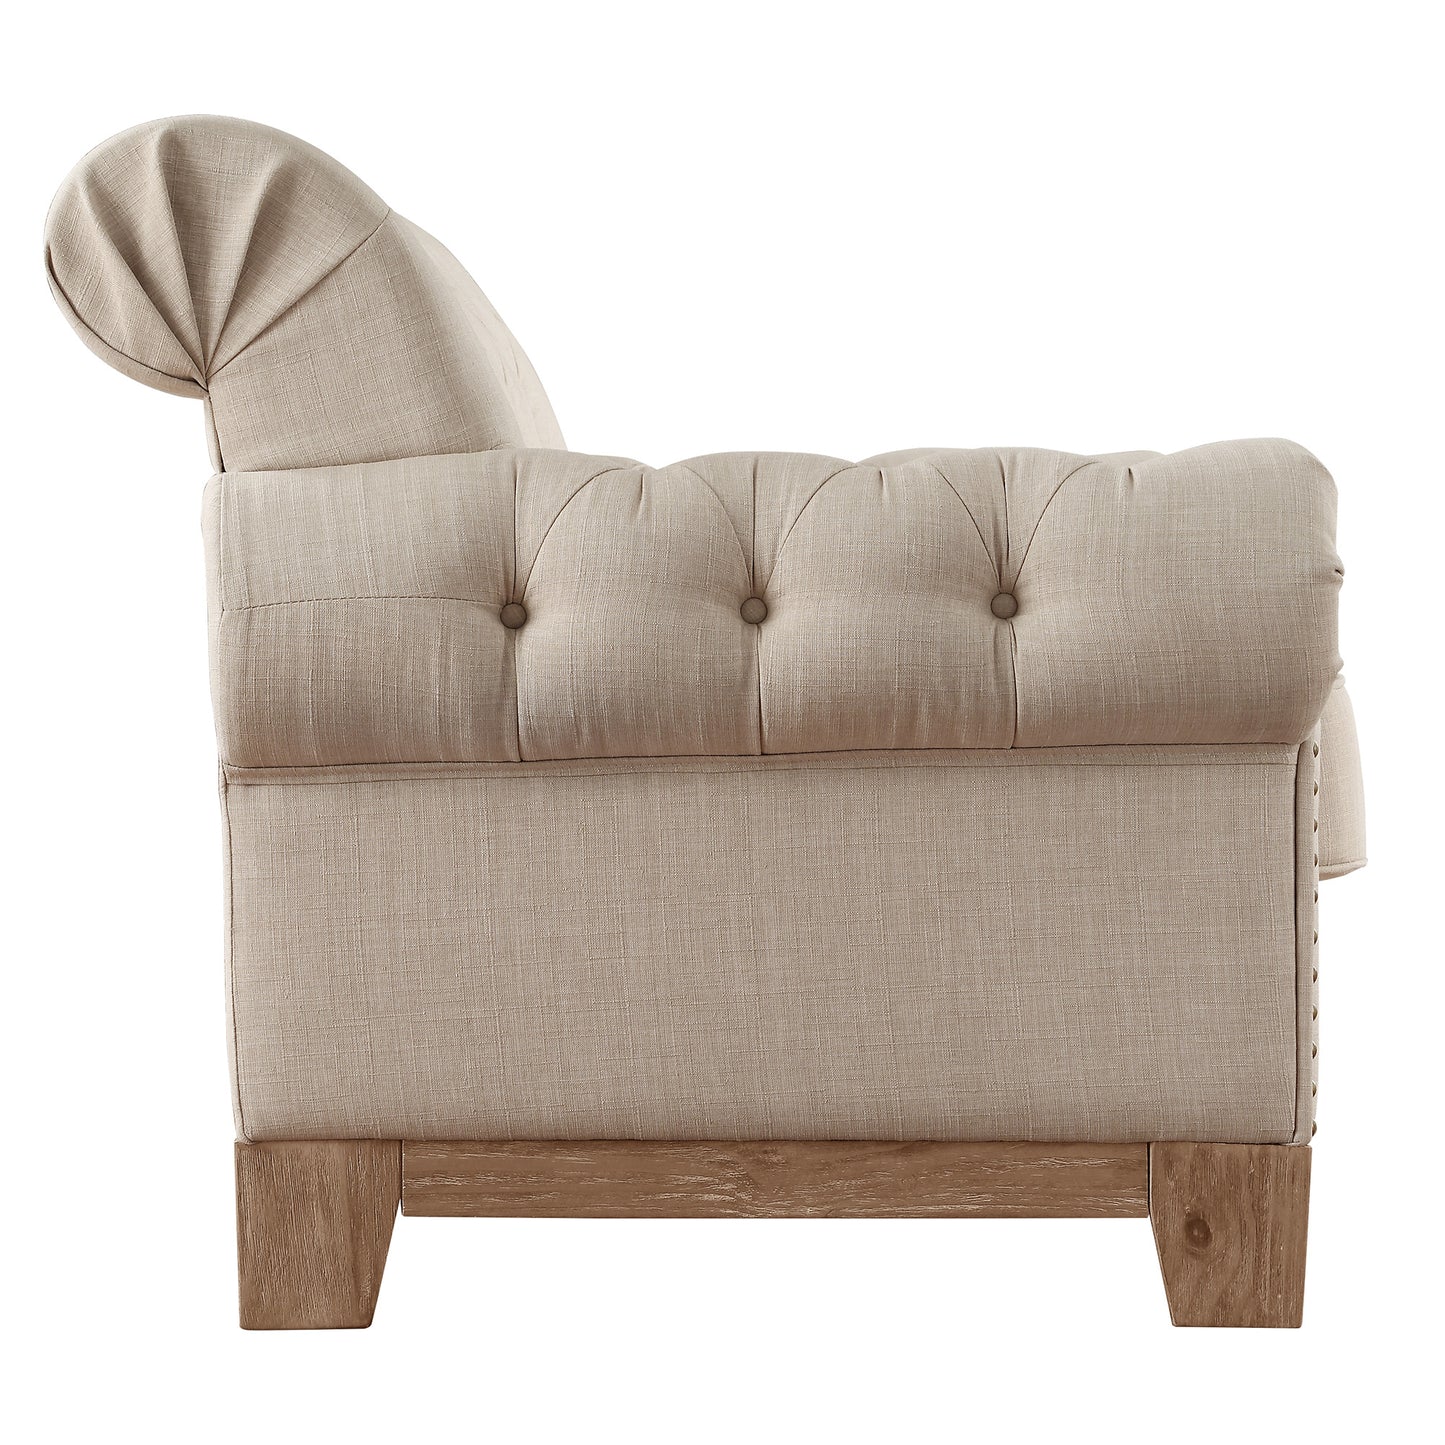 Tufted Rolled Arm Chesterfield Chair - Beige Linen